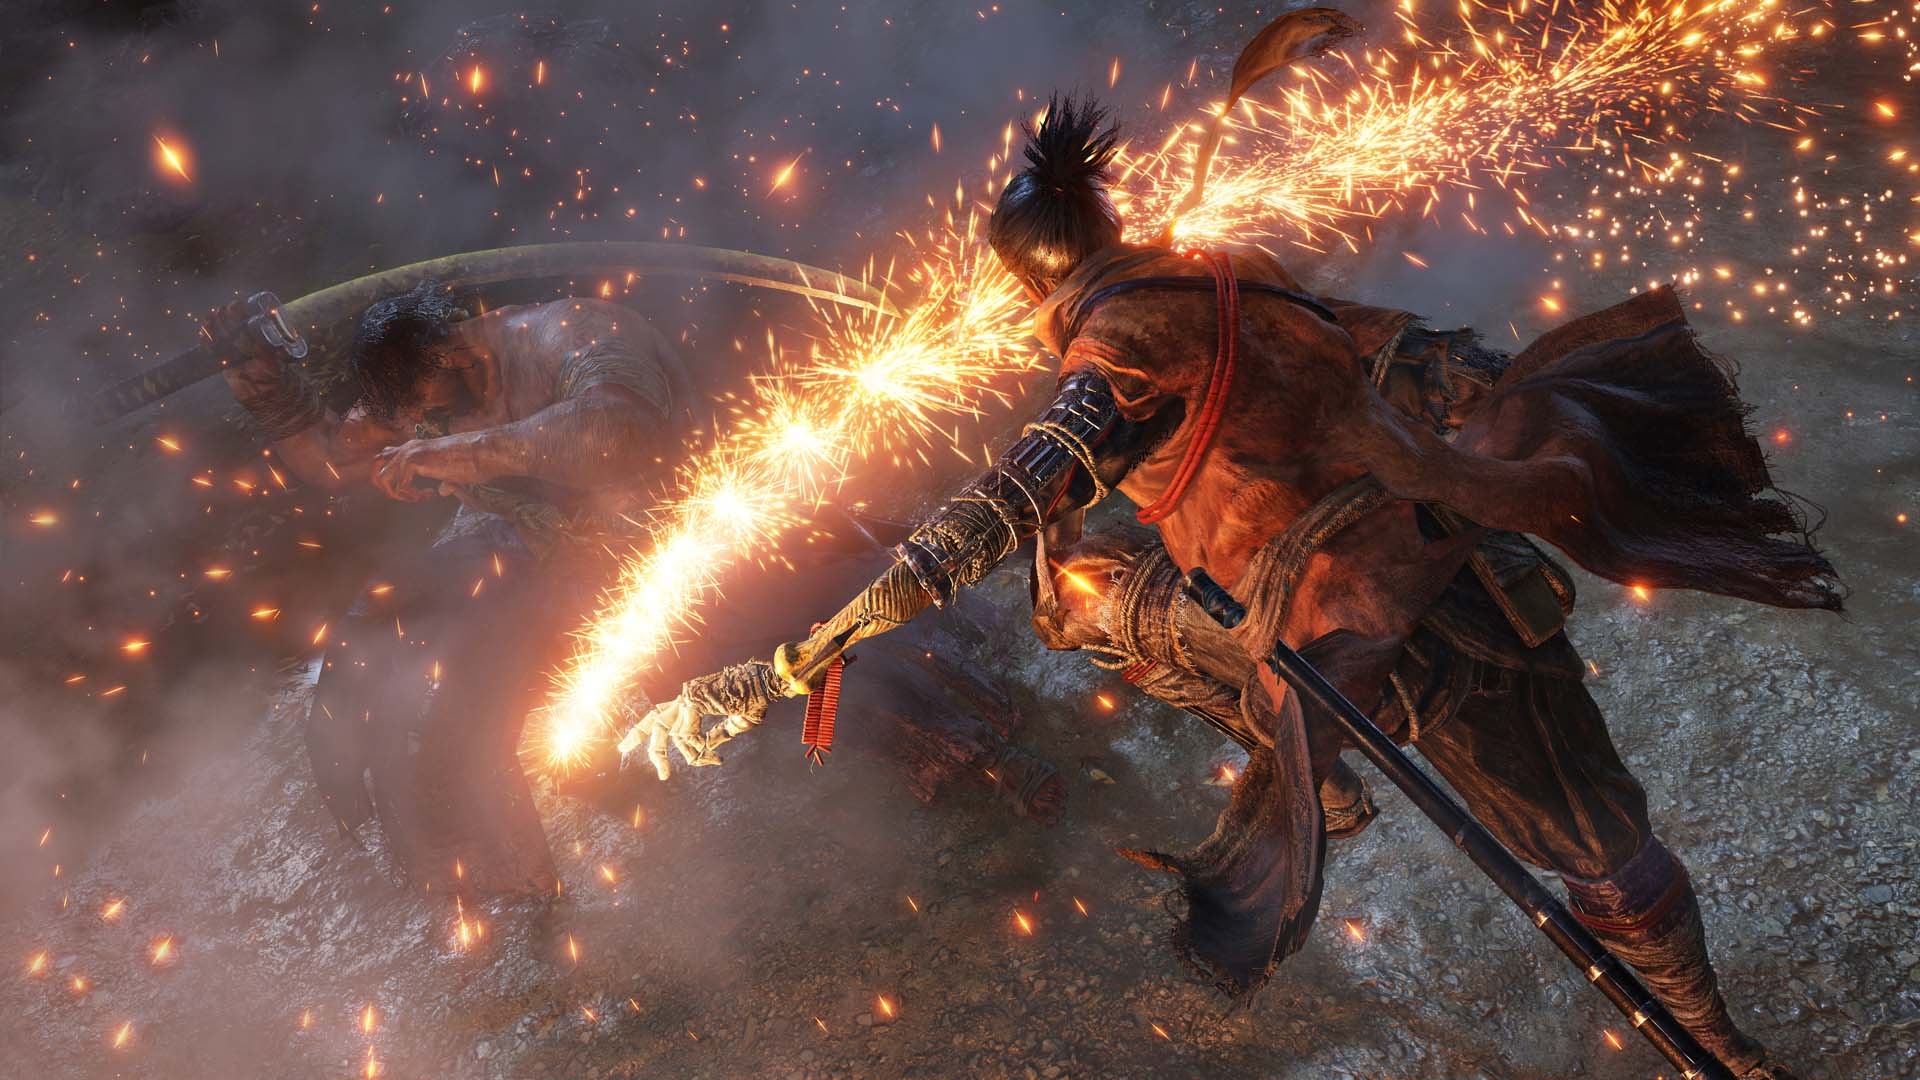 Sekiro: Shadows Die Twice Is Getting A Free Update On October 28 Bringing New Challenges